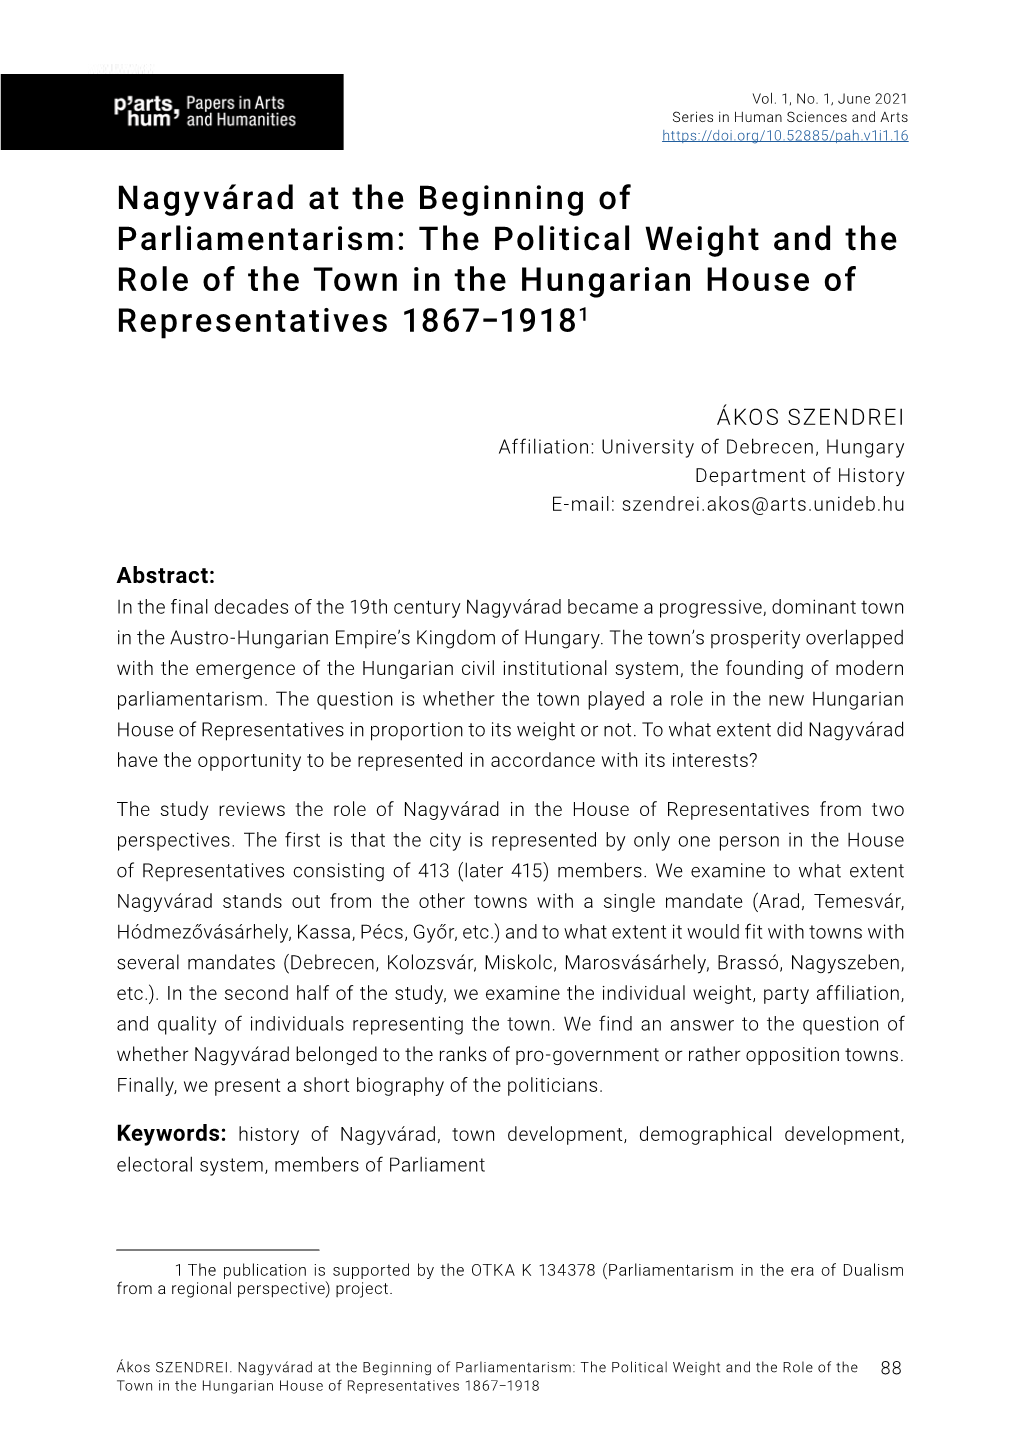 Nagyvárad at the Beginning of Parliamentarism: the Political Weight and the Role of the Town in the Hungarian House of Representatives 1867−19181